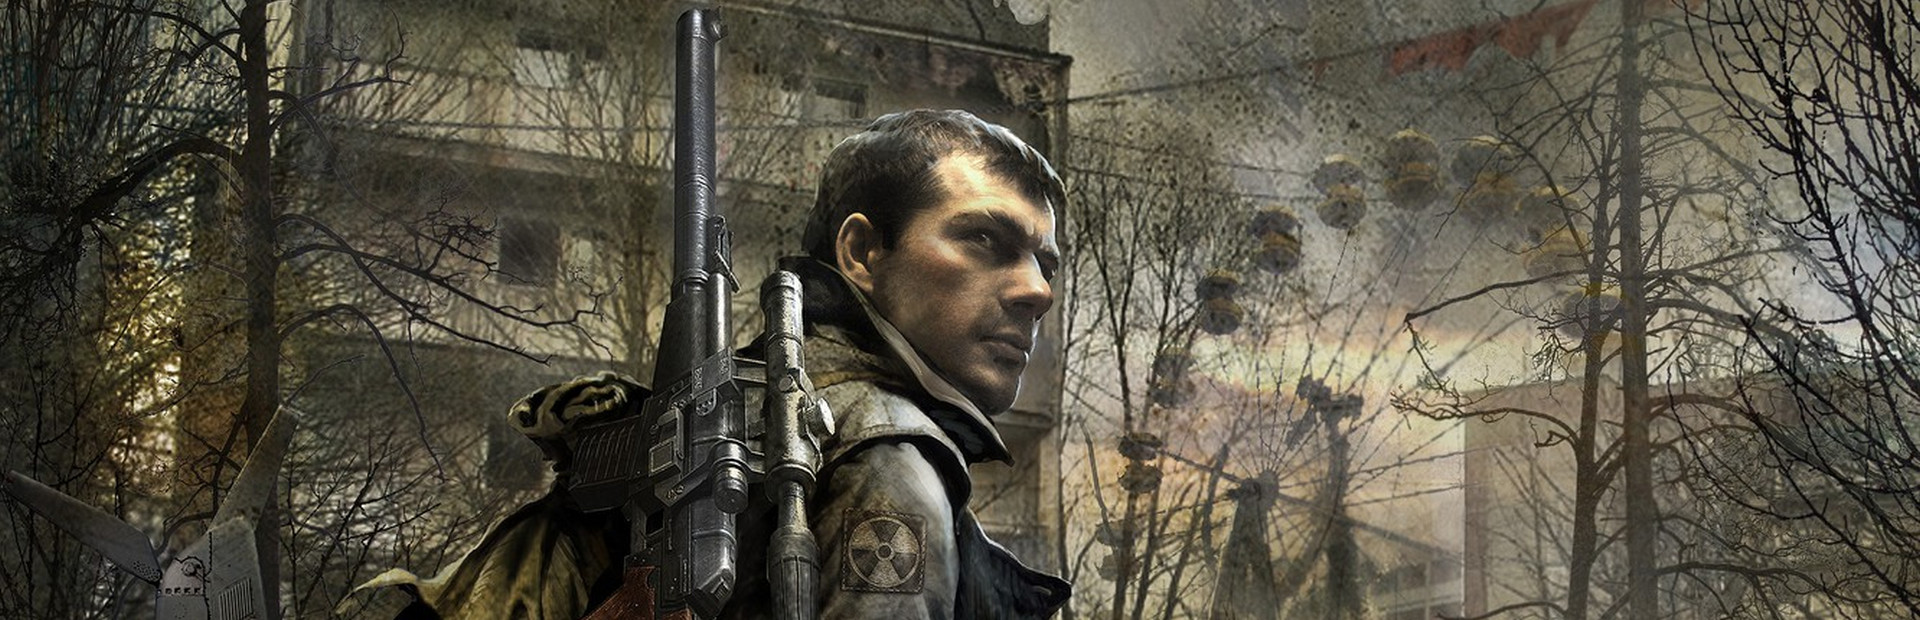 S.T.A.L.K.E.R.: Call of Pripyat cover image